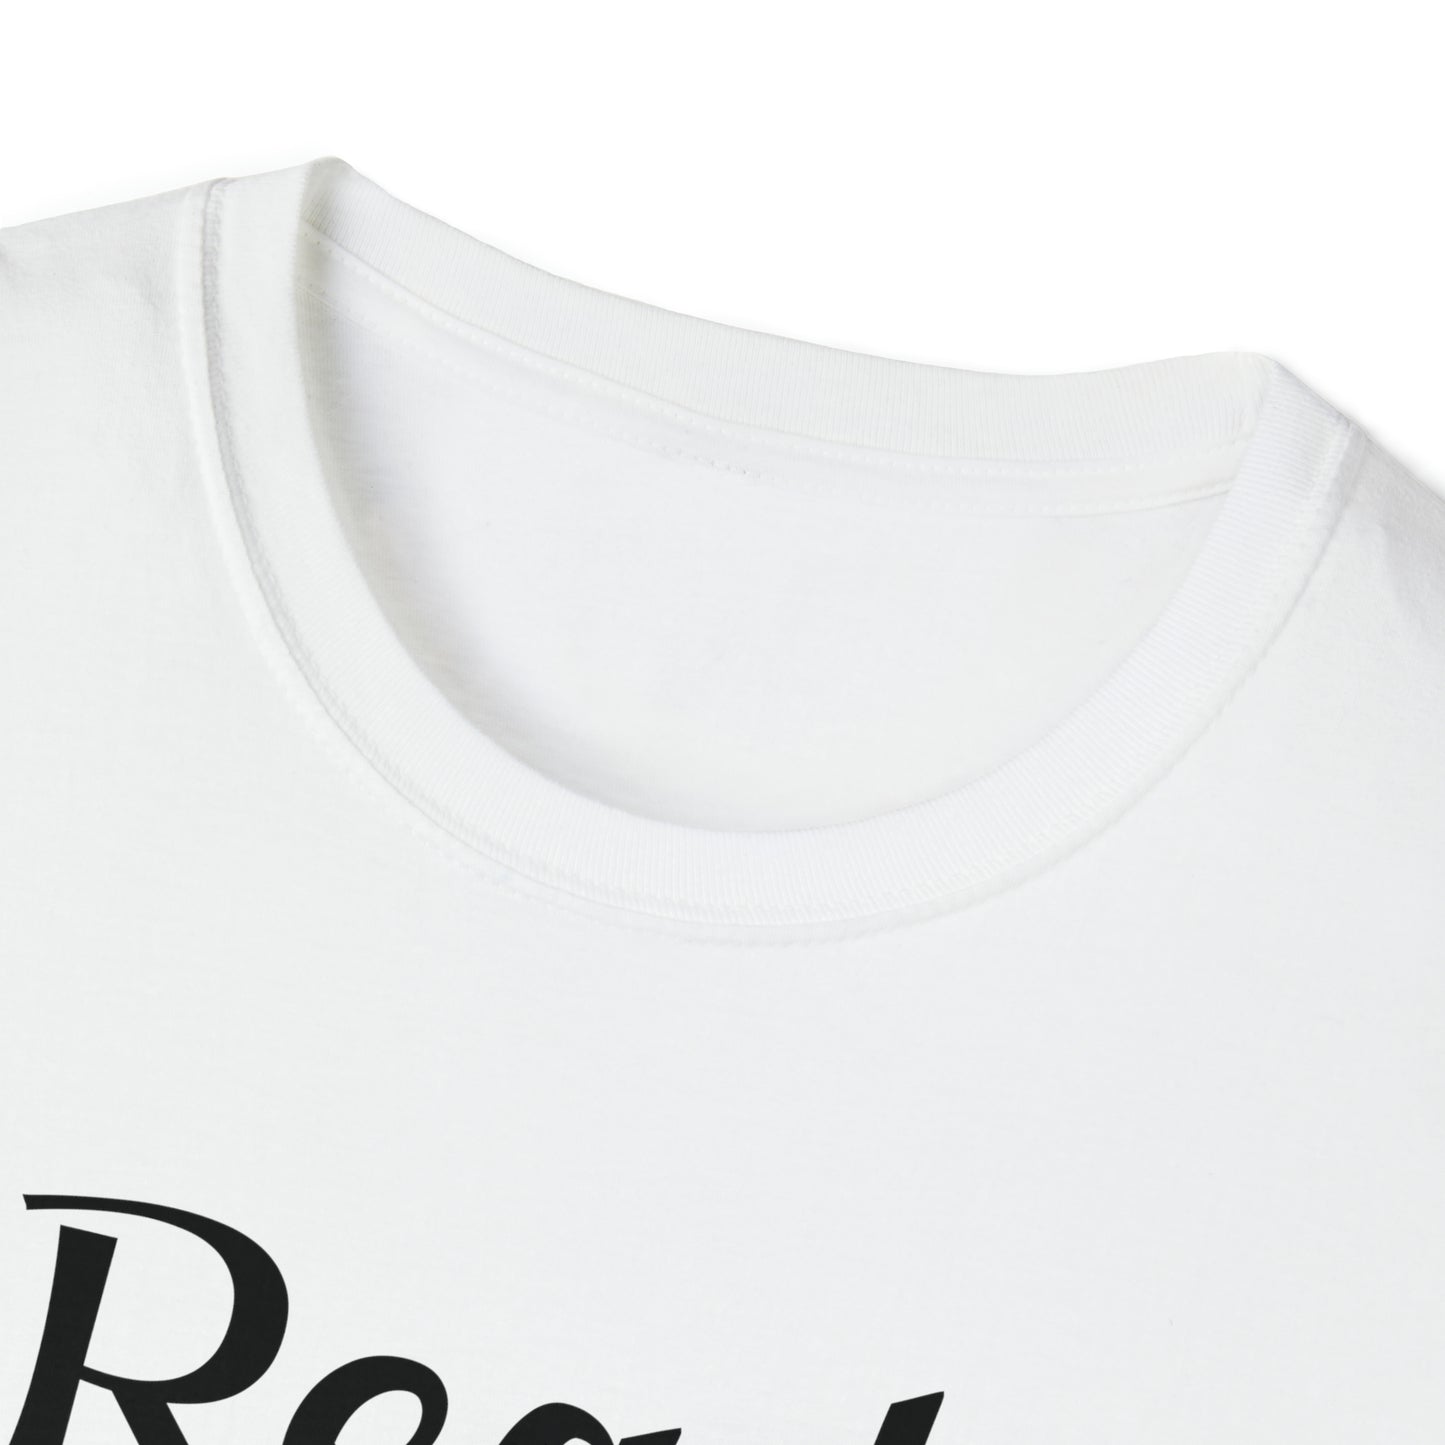 Read and Write On Unisex Softstyle T-Shirt